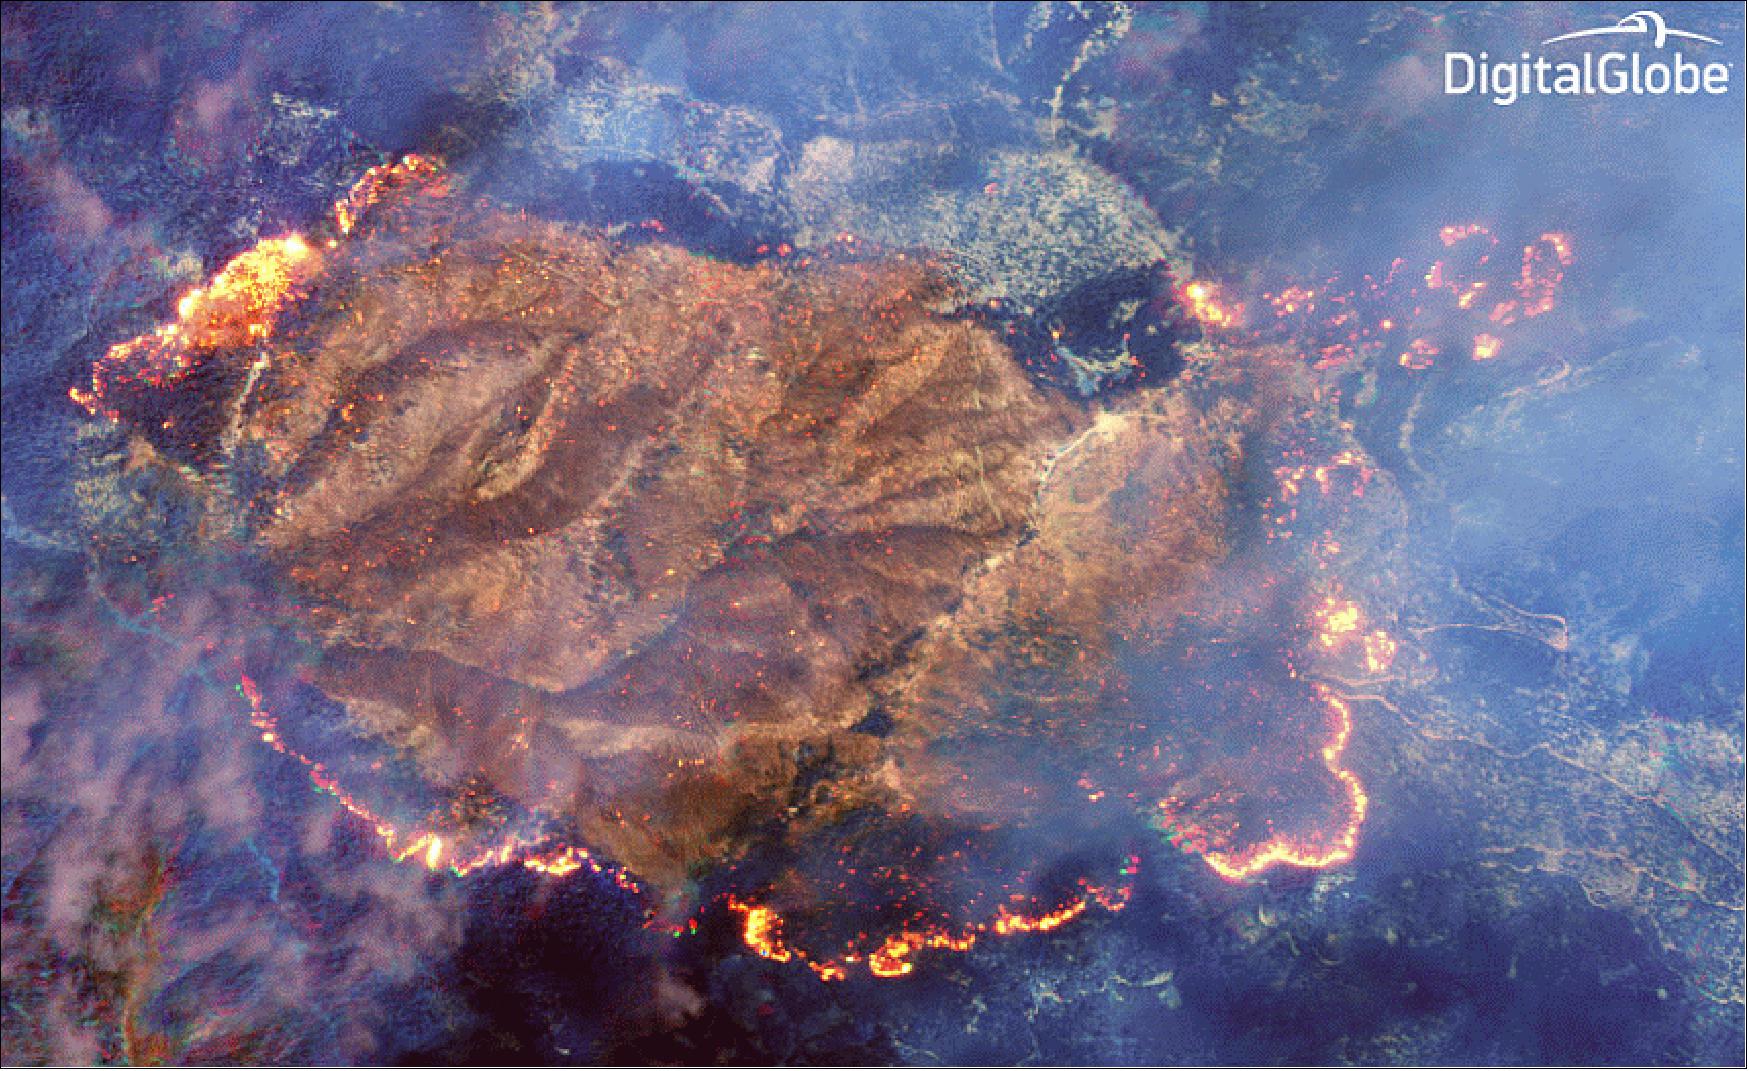 Figure 21: WorldView-3 satellite image capture of the fire at the Happy Camp complex in California’s Klamath National Forest (image credit: DigitalGlobe)